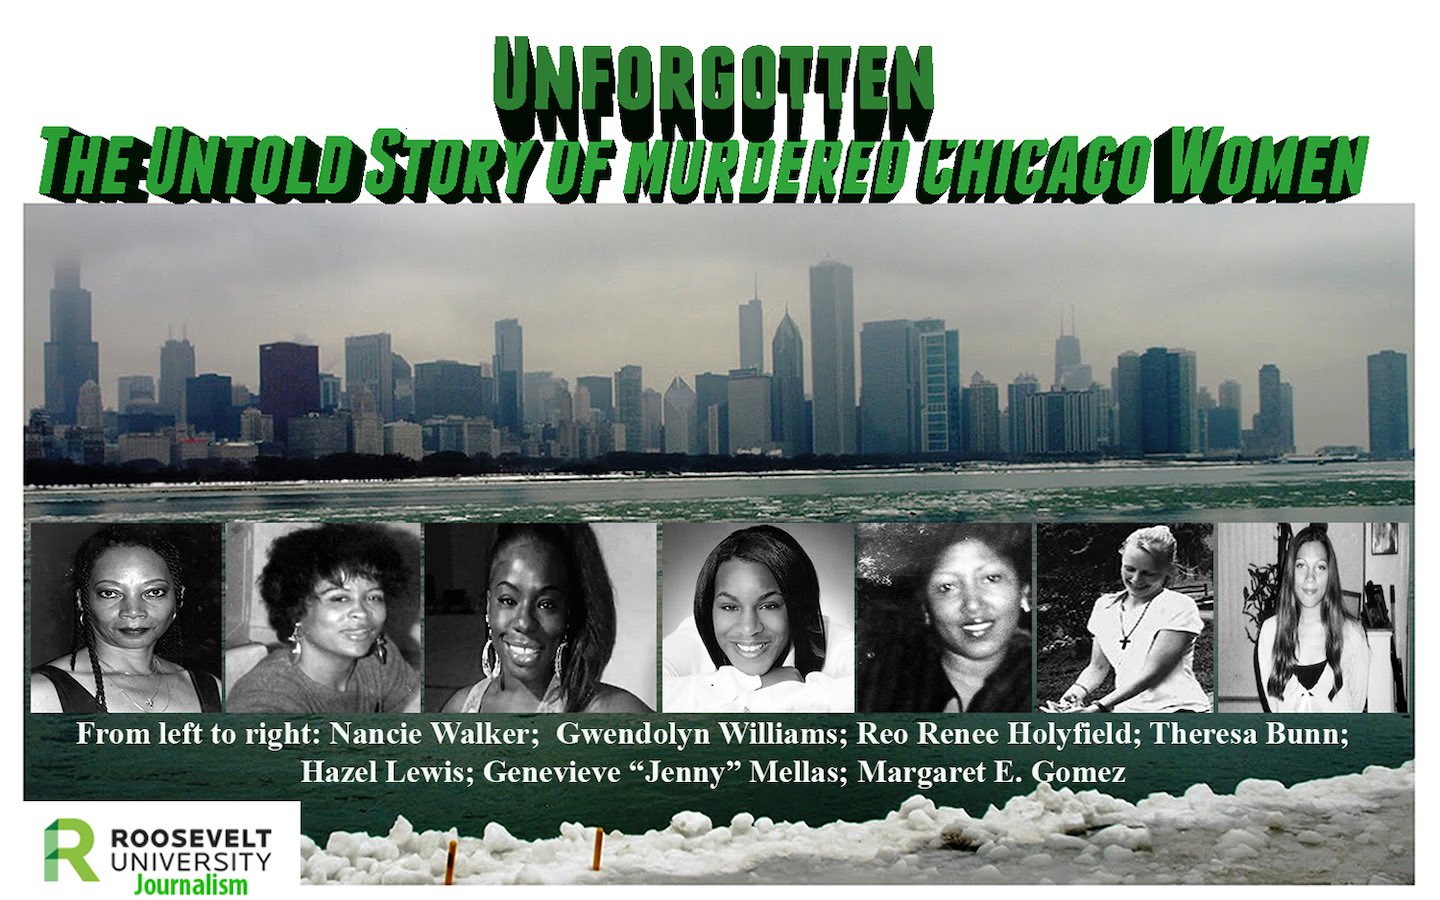 Chicago skyline with text Unforgotten: The Untold Story of Murdered Chicago Women and photos of Nancie Walker, Gwendolyn Williams, Reo Renee Holyfield, Theresa Bunn, Hazel Lewis, Genevieve "Jenny" Mellas, Margaret E. Gomez